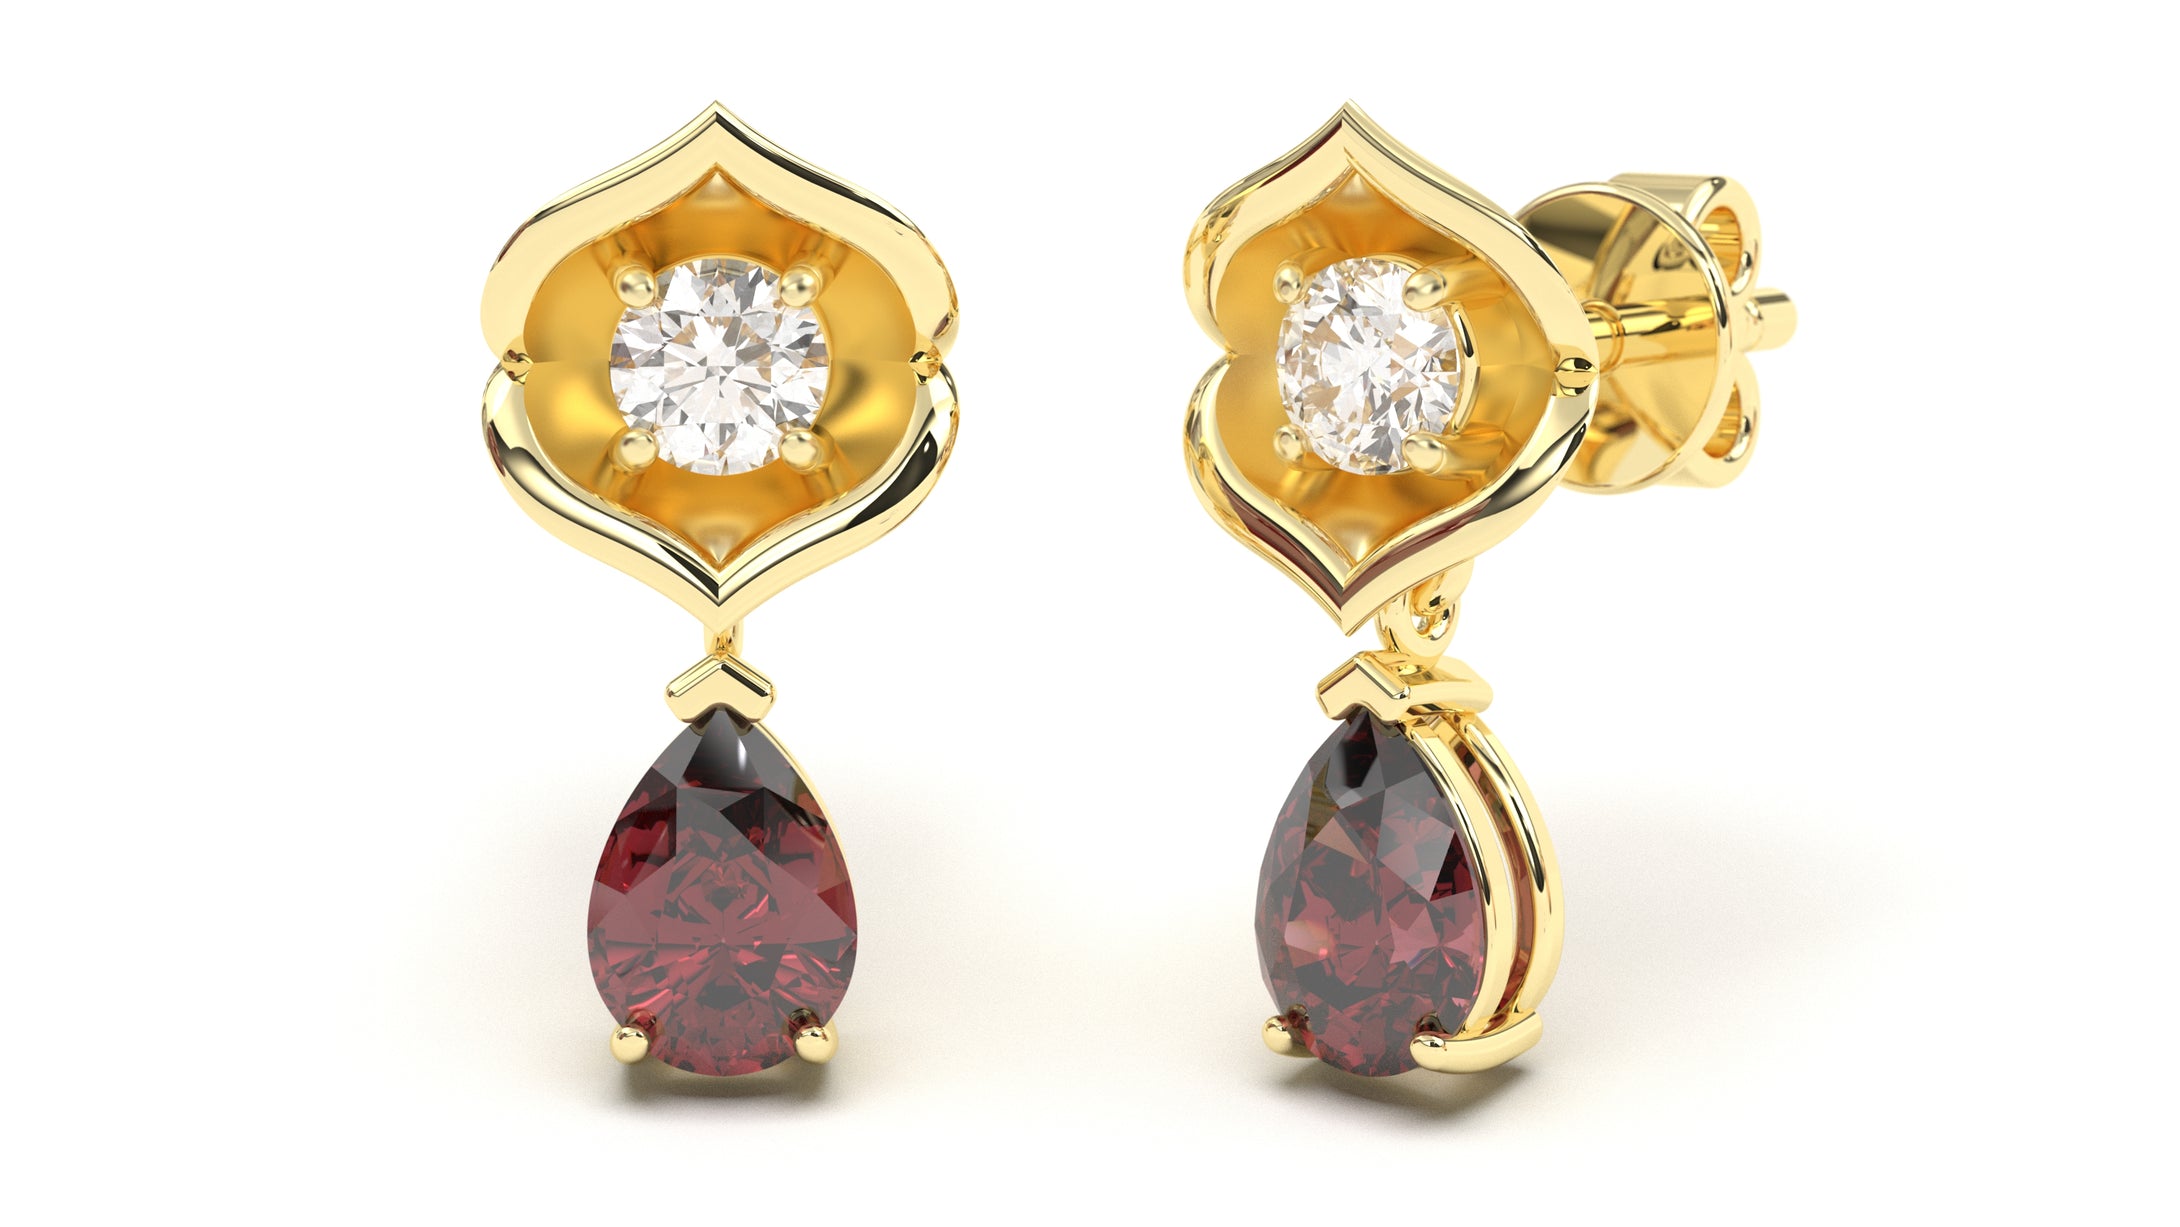 Earrings with Pearshape Garnets and Round White Diamonds | Bloom Flora I